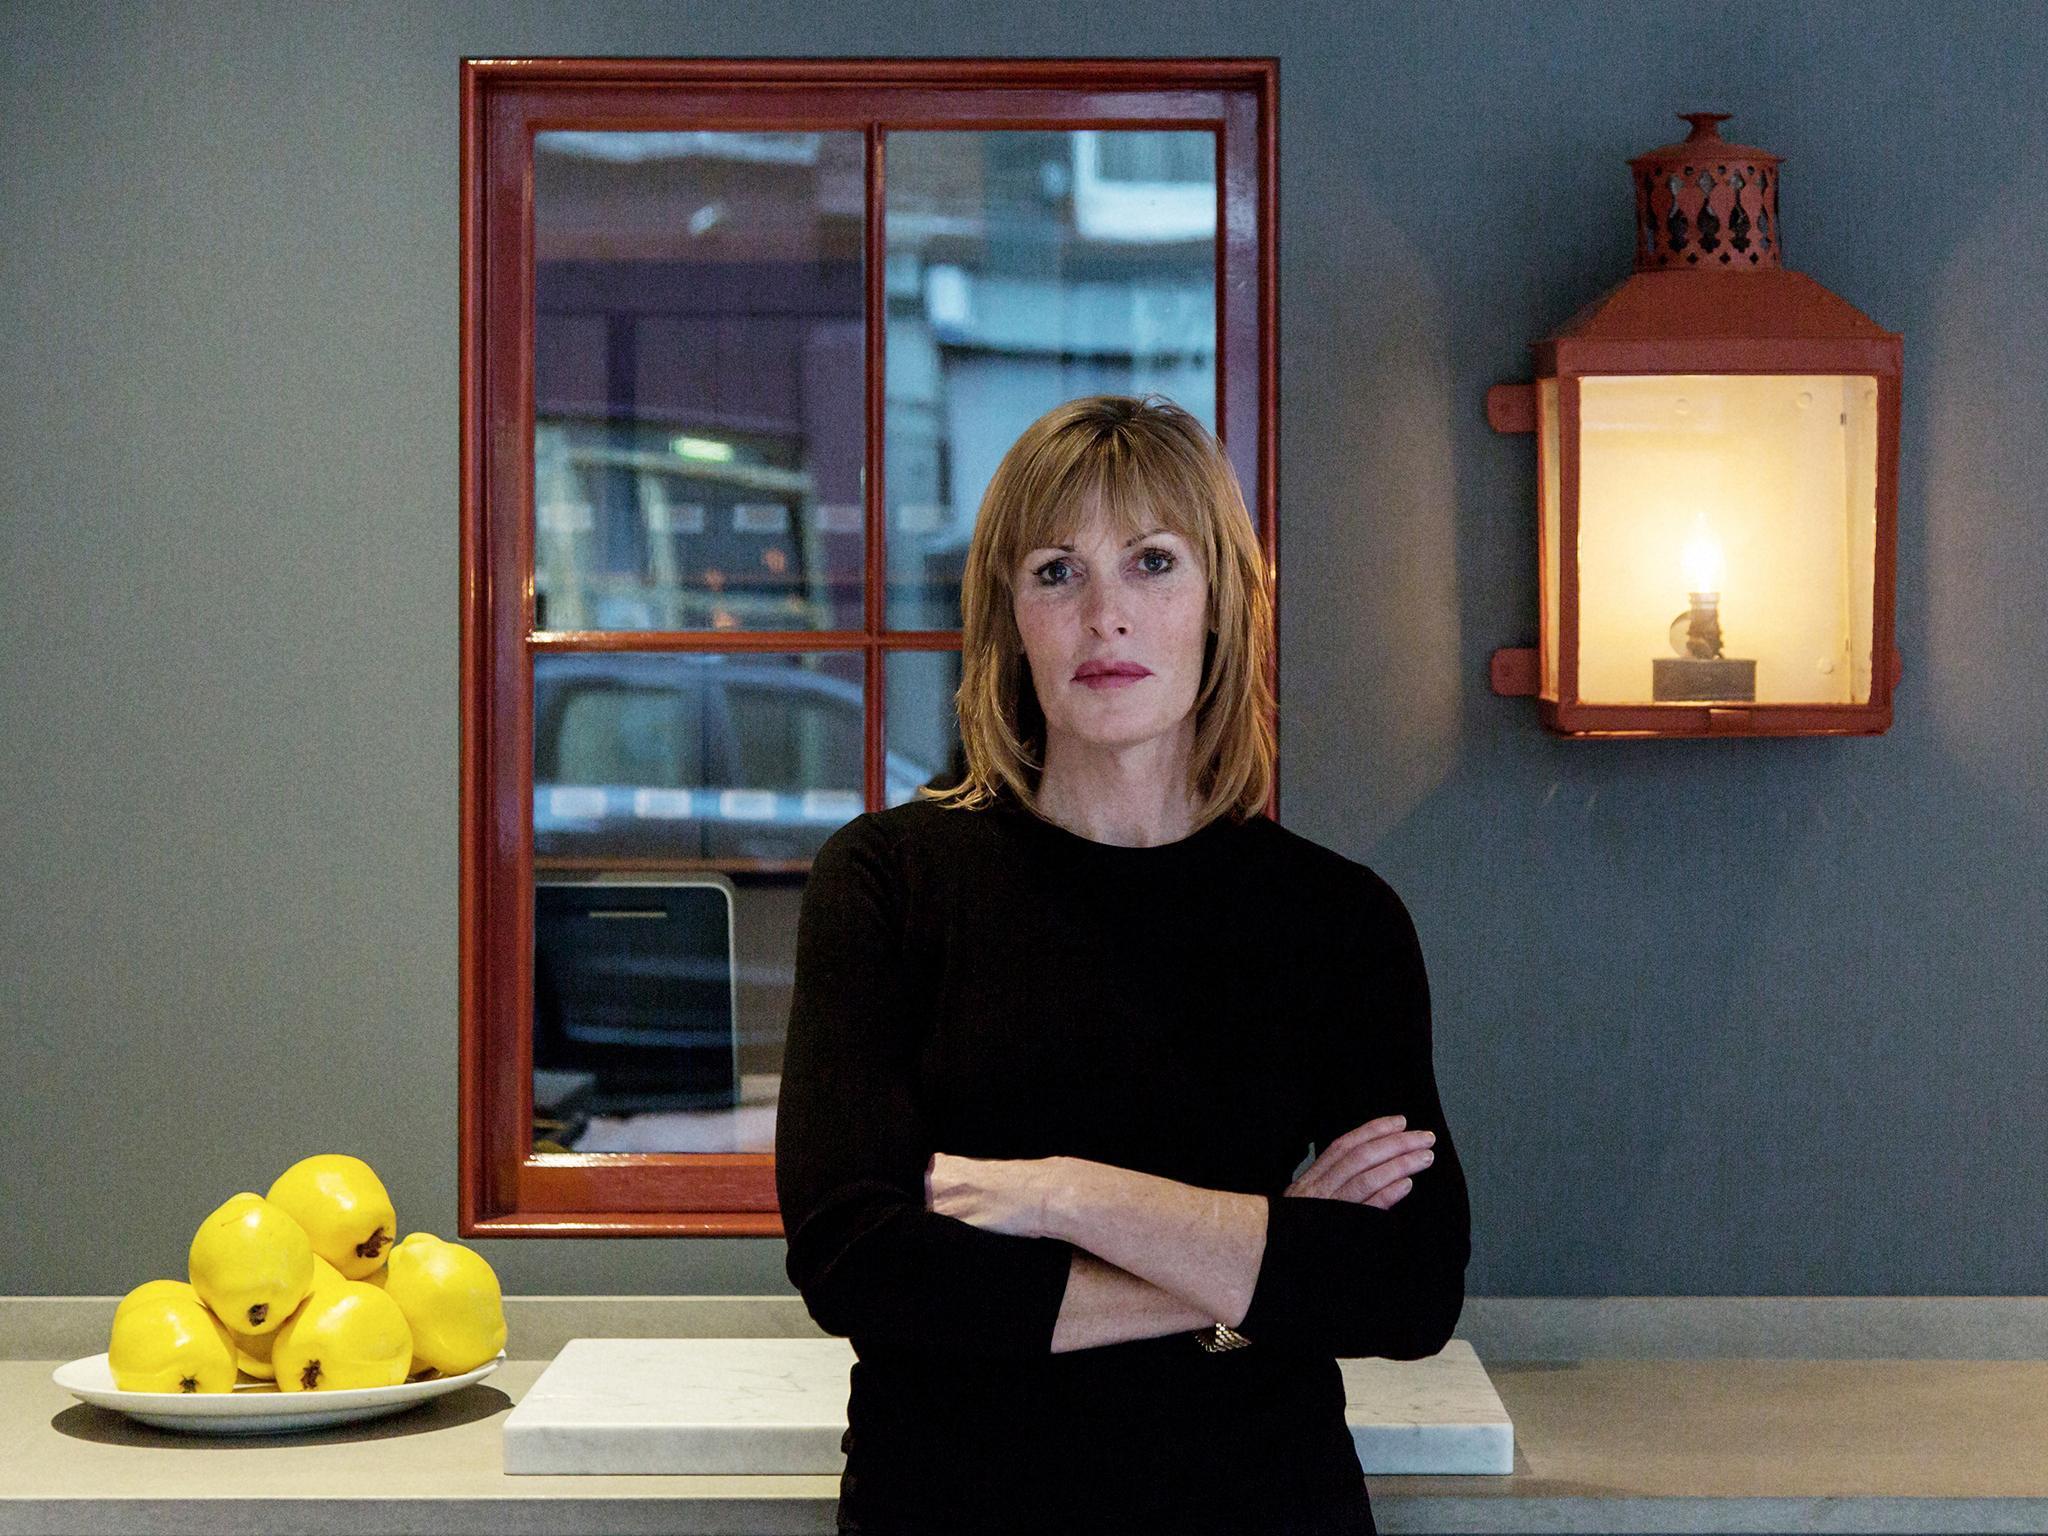 Australian born chef, Skye Gyngell, runs her restaurant Spring as a strong female kitchen that's fighting to reduce food and plastic waste